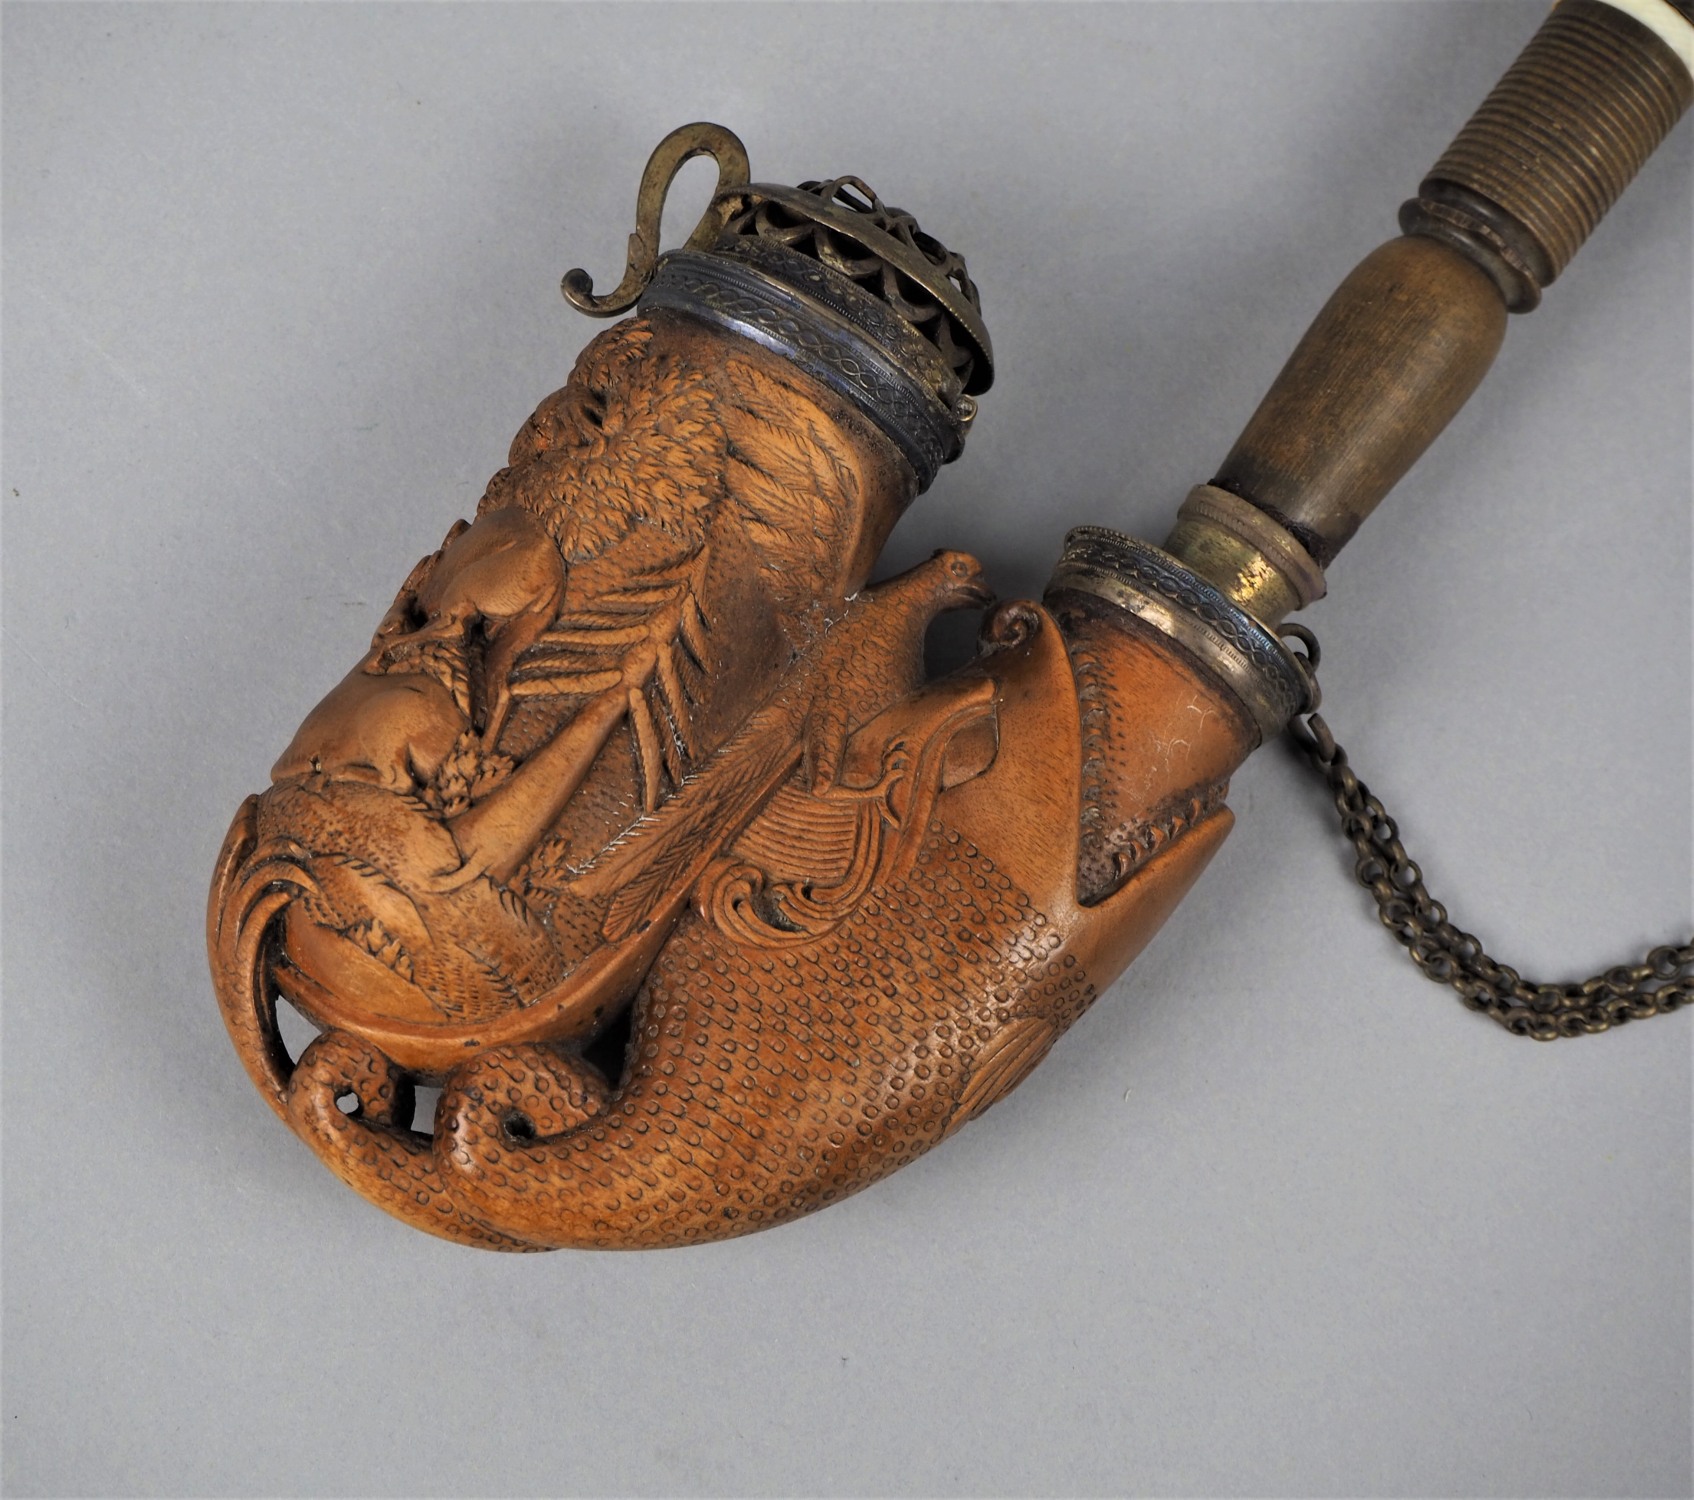 Tobacco pipe Ulmer Kloben / Bag pipe, early 19th century. - Image 3 of 5